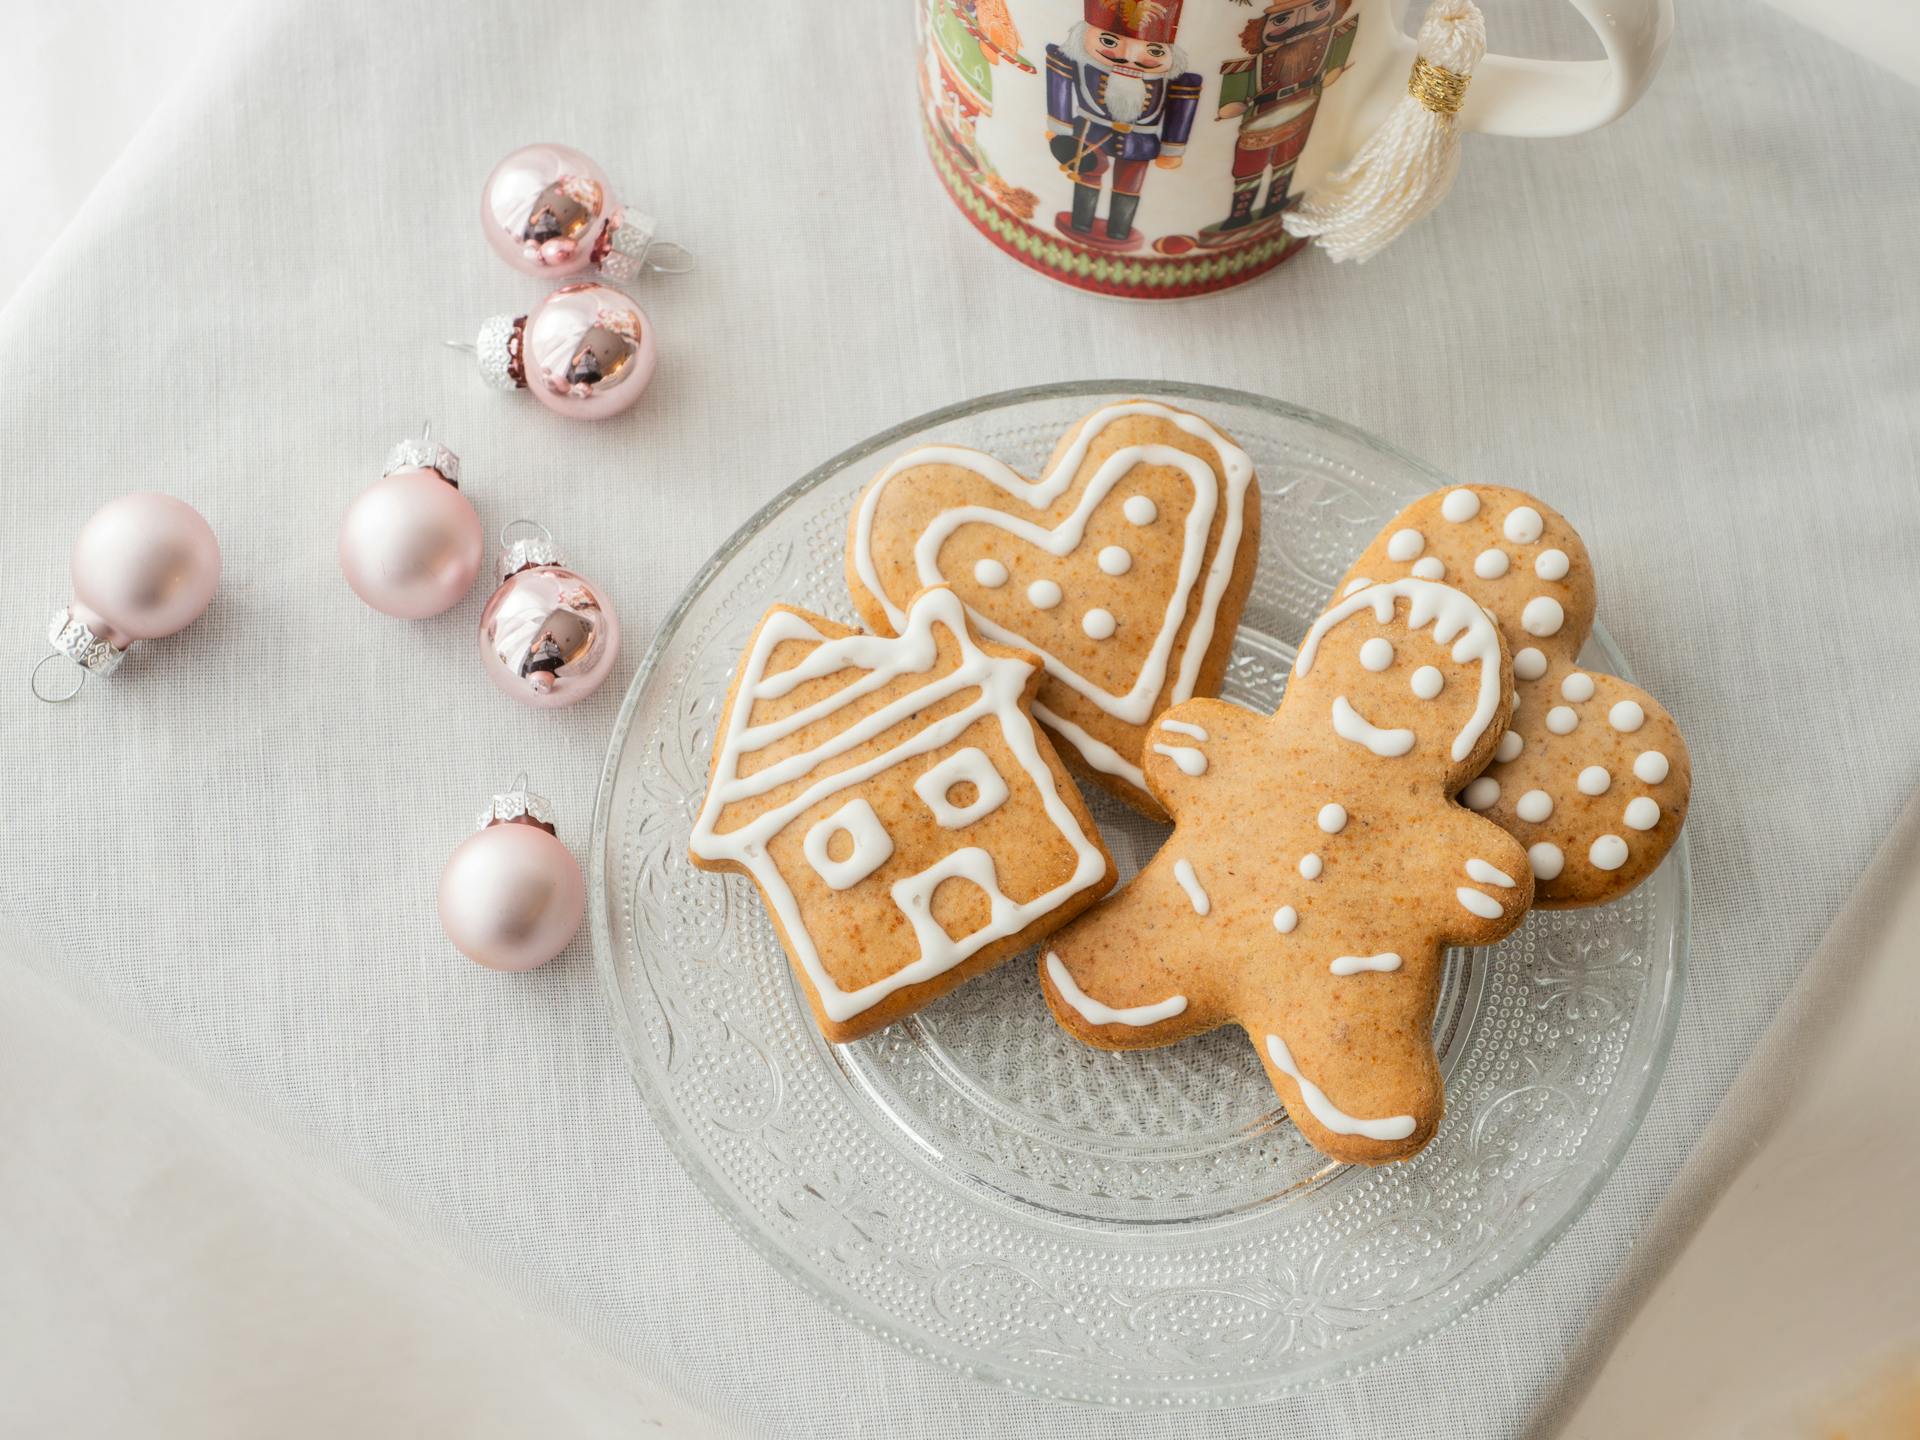 Gingerbread cookies and Christmas decorations | Source: Pexels